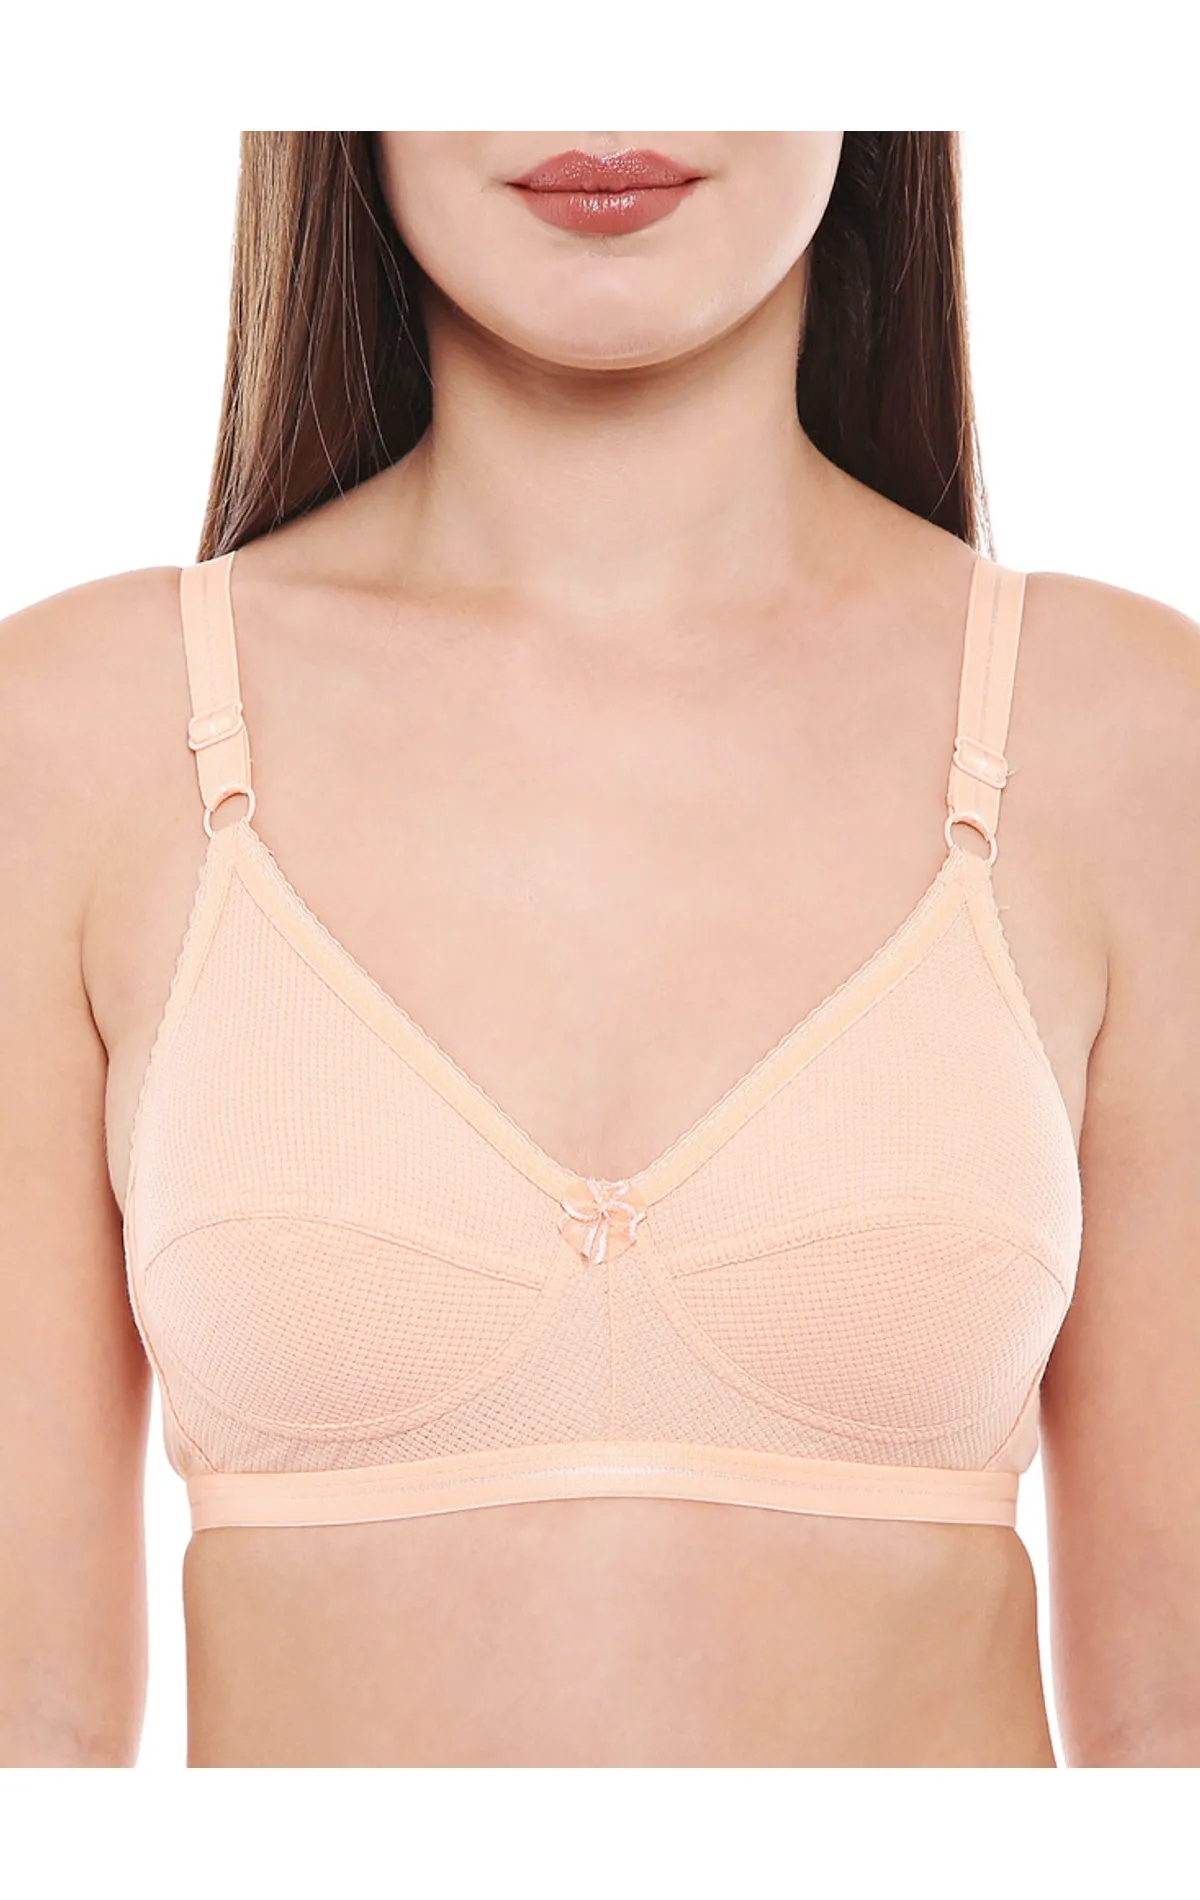 BODYCARE 1517PINK Perfect Full Coverage Seamed Bra (44B, Pink) in